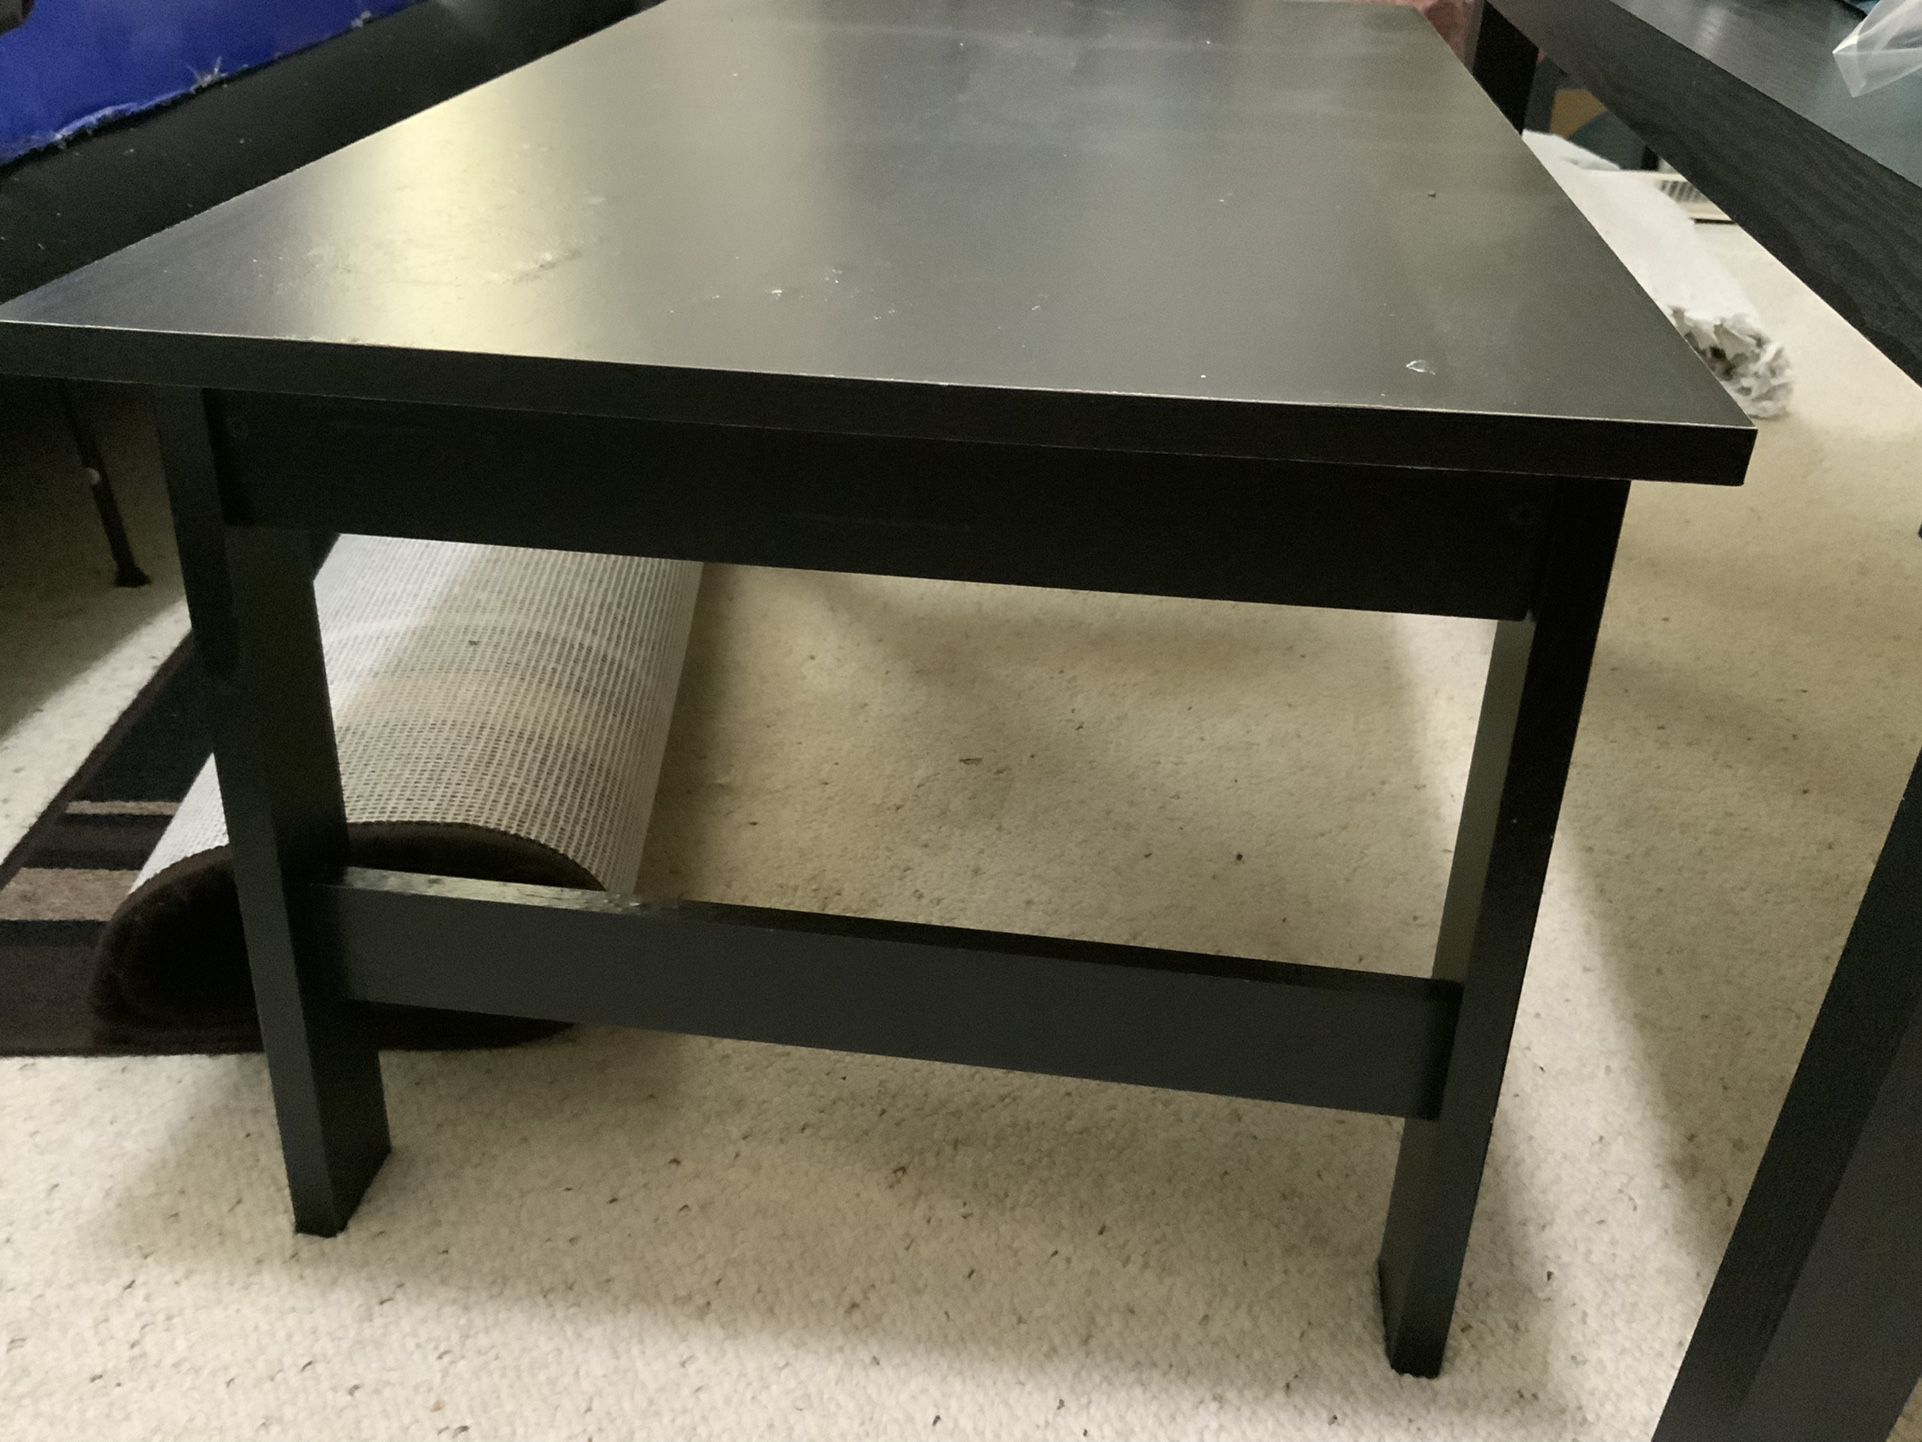 Small black coffee table